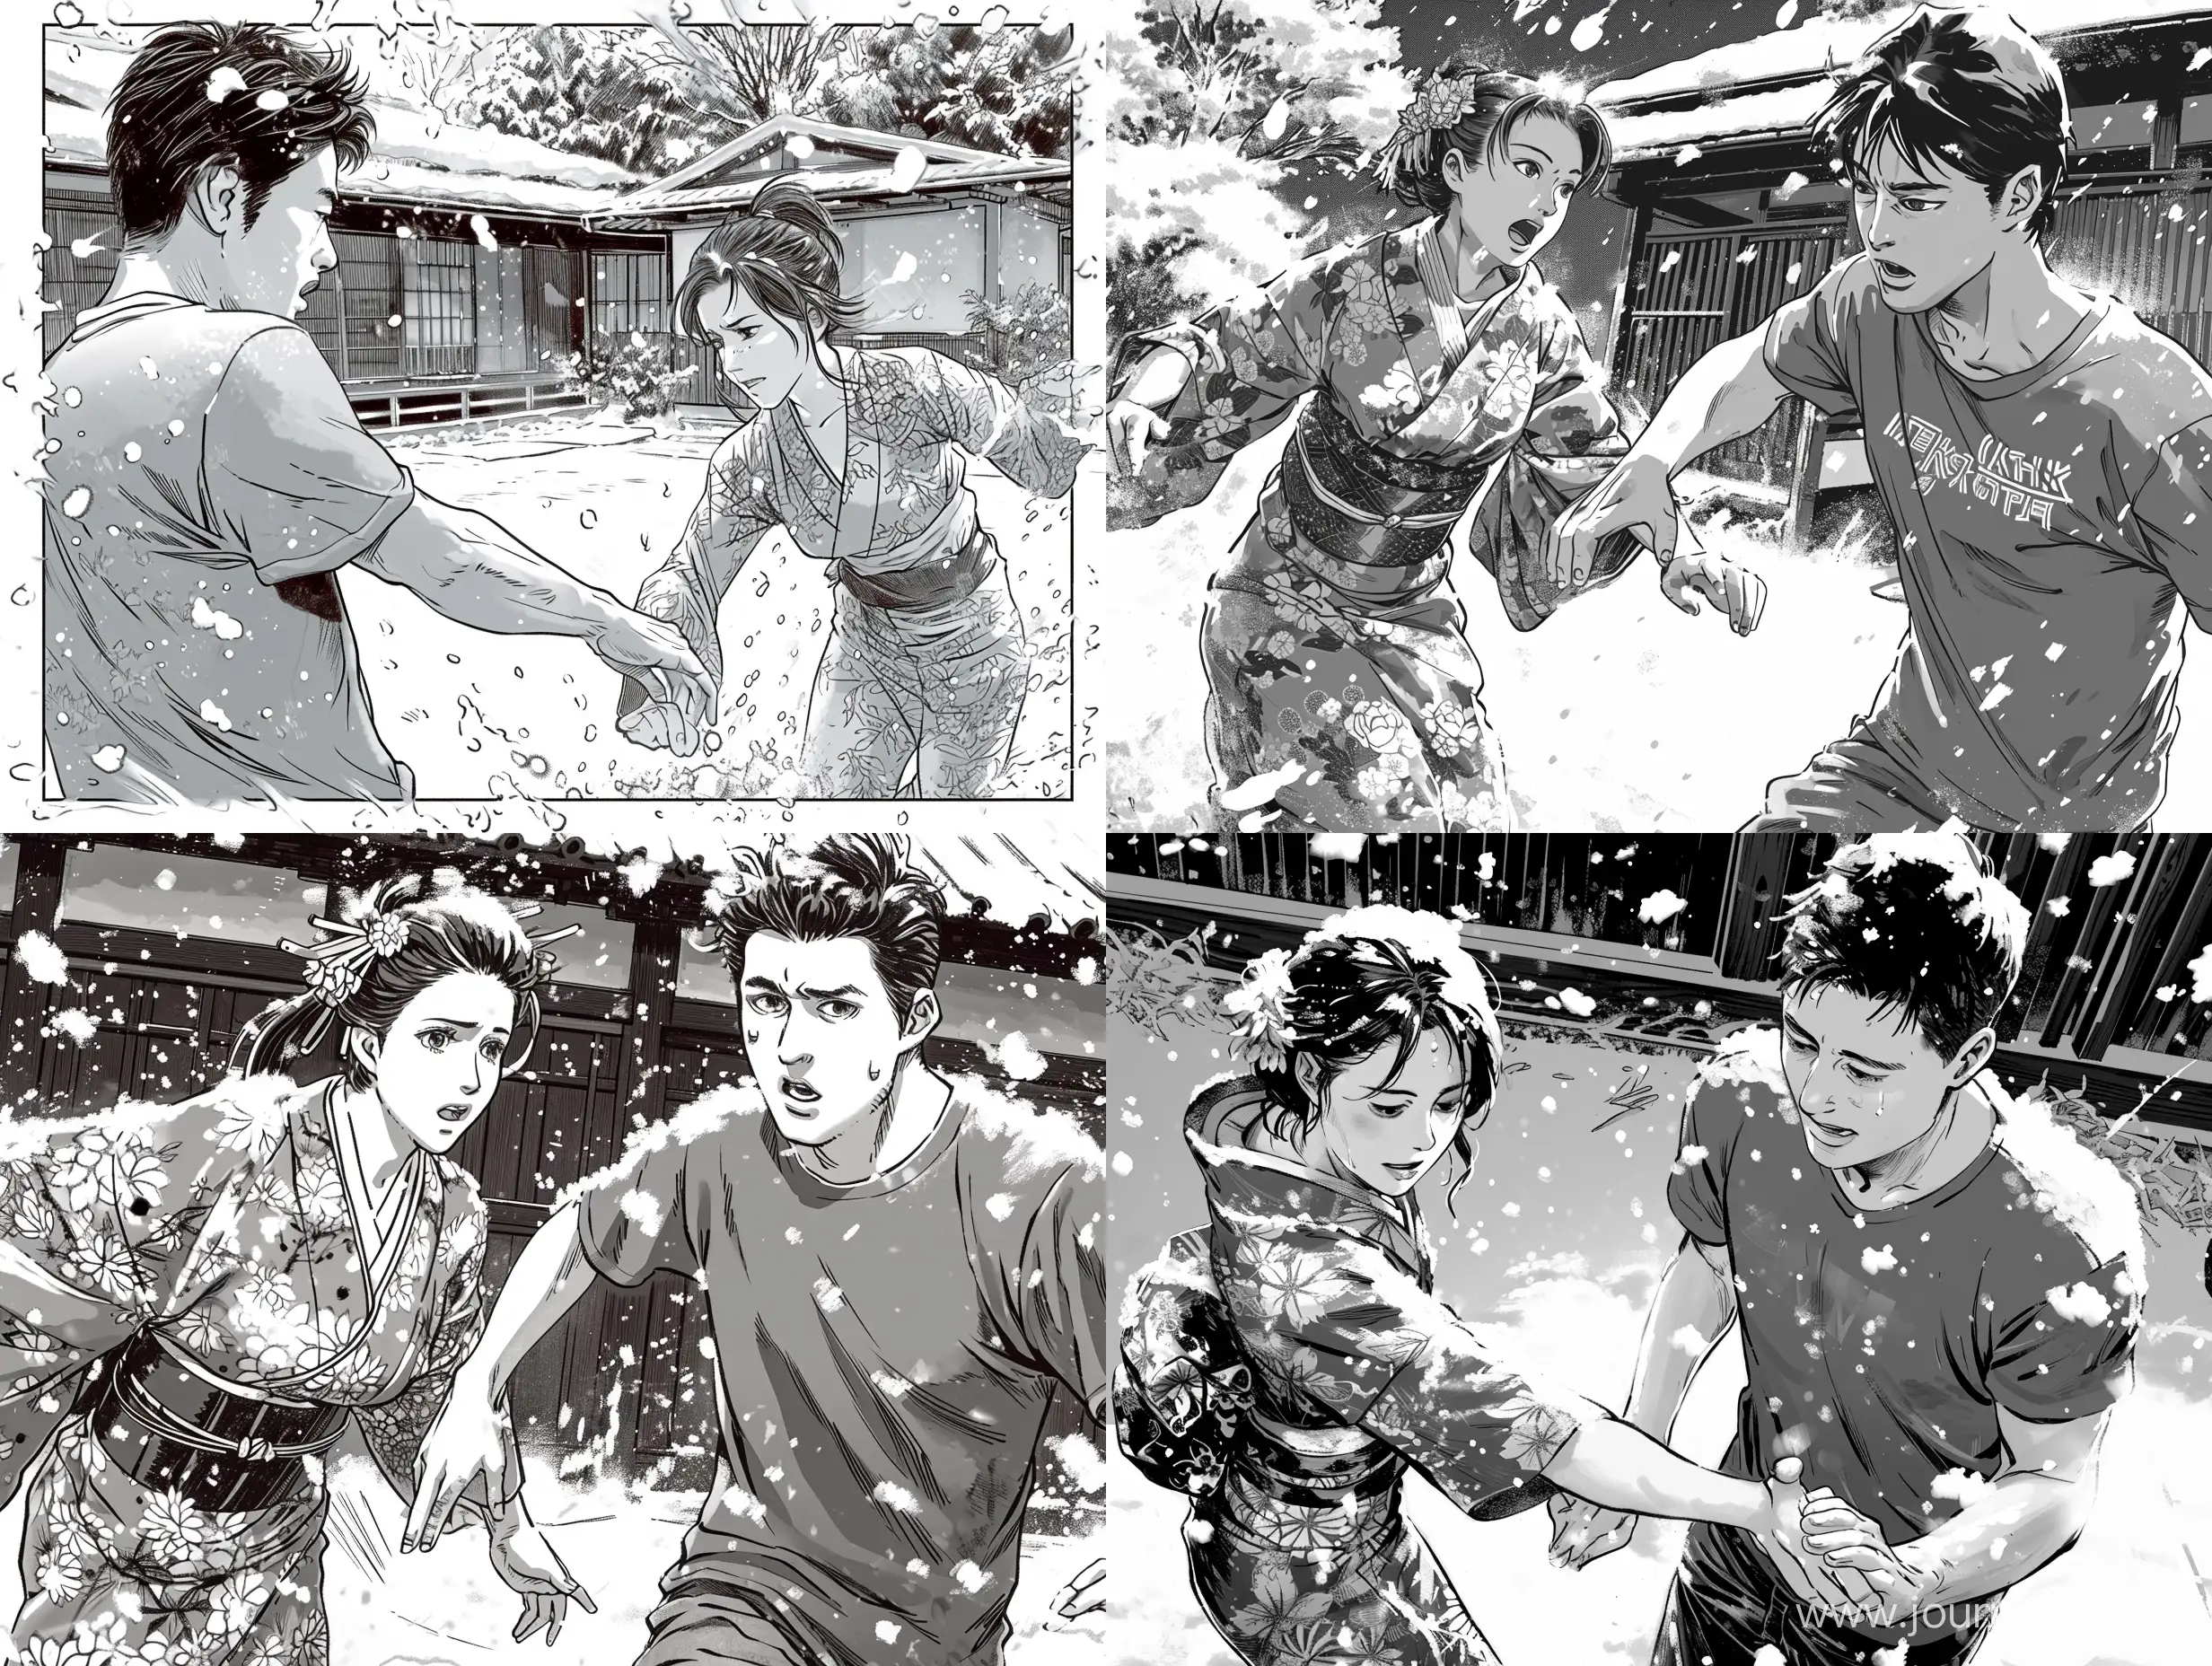 Kind-Gesture-in-Snowy-Weather-Man-in-TShirt-Saves-Woman-in-Kimono-from-Falling